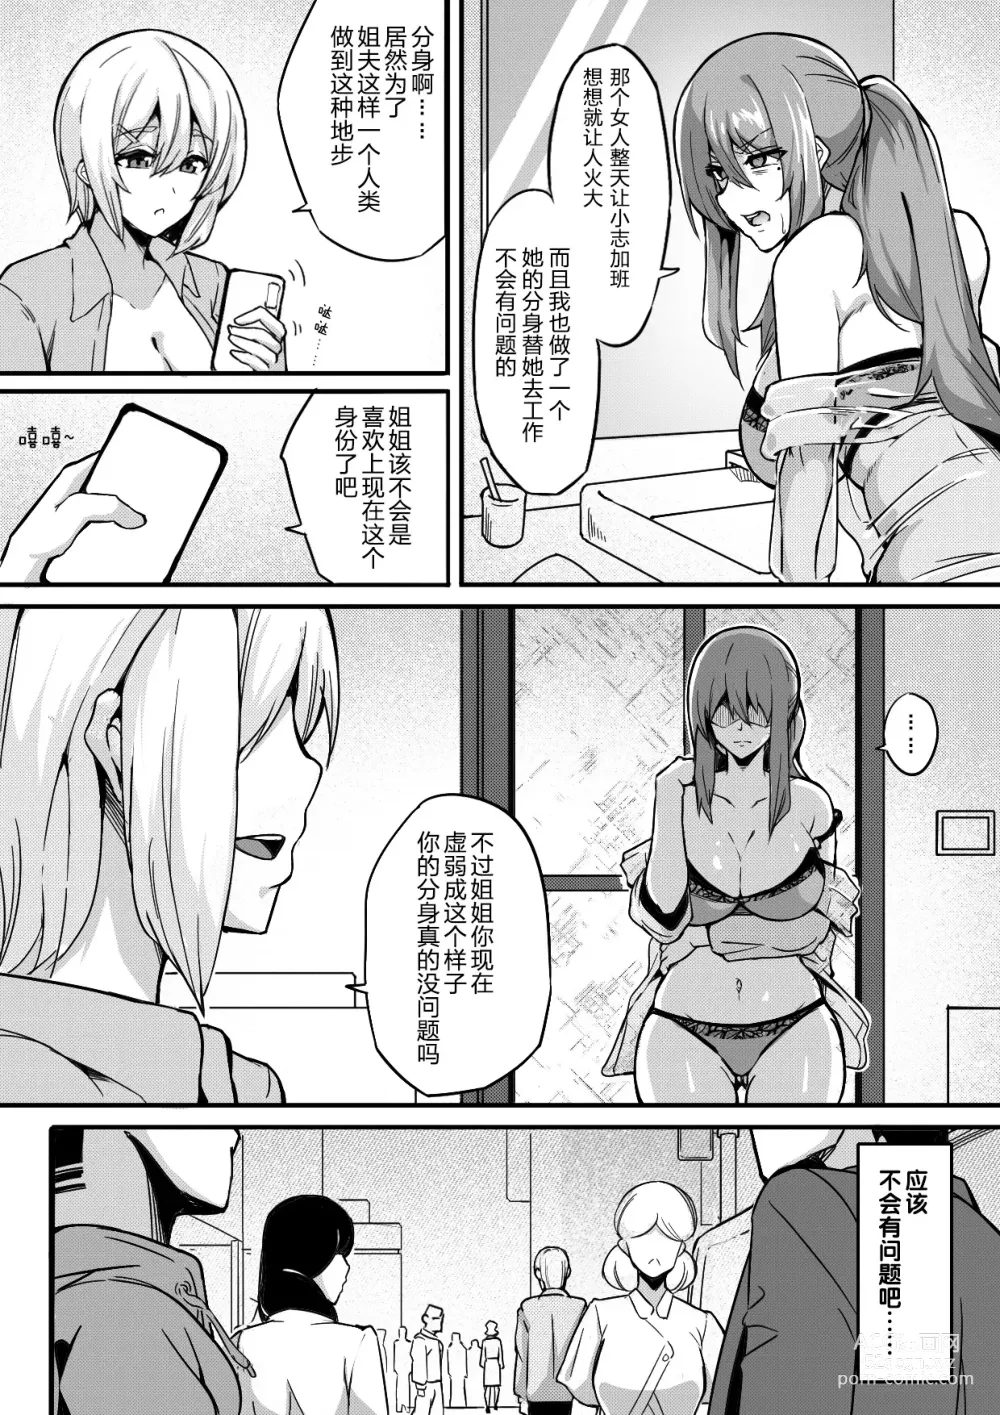 Page 6 of doujinshi LiveMeat05